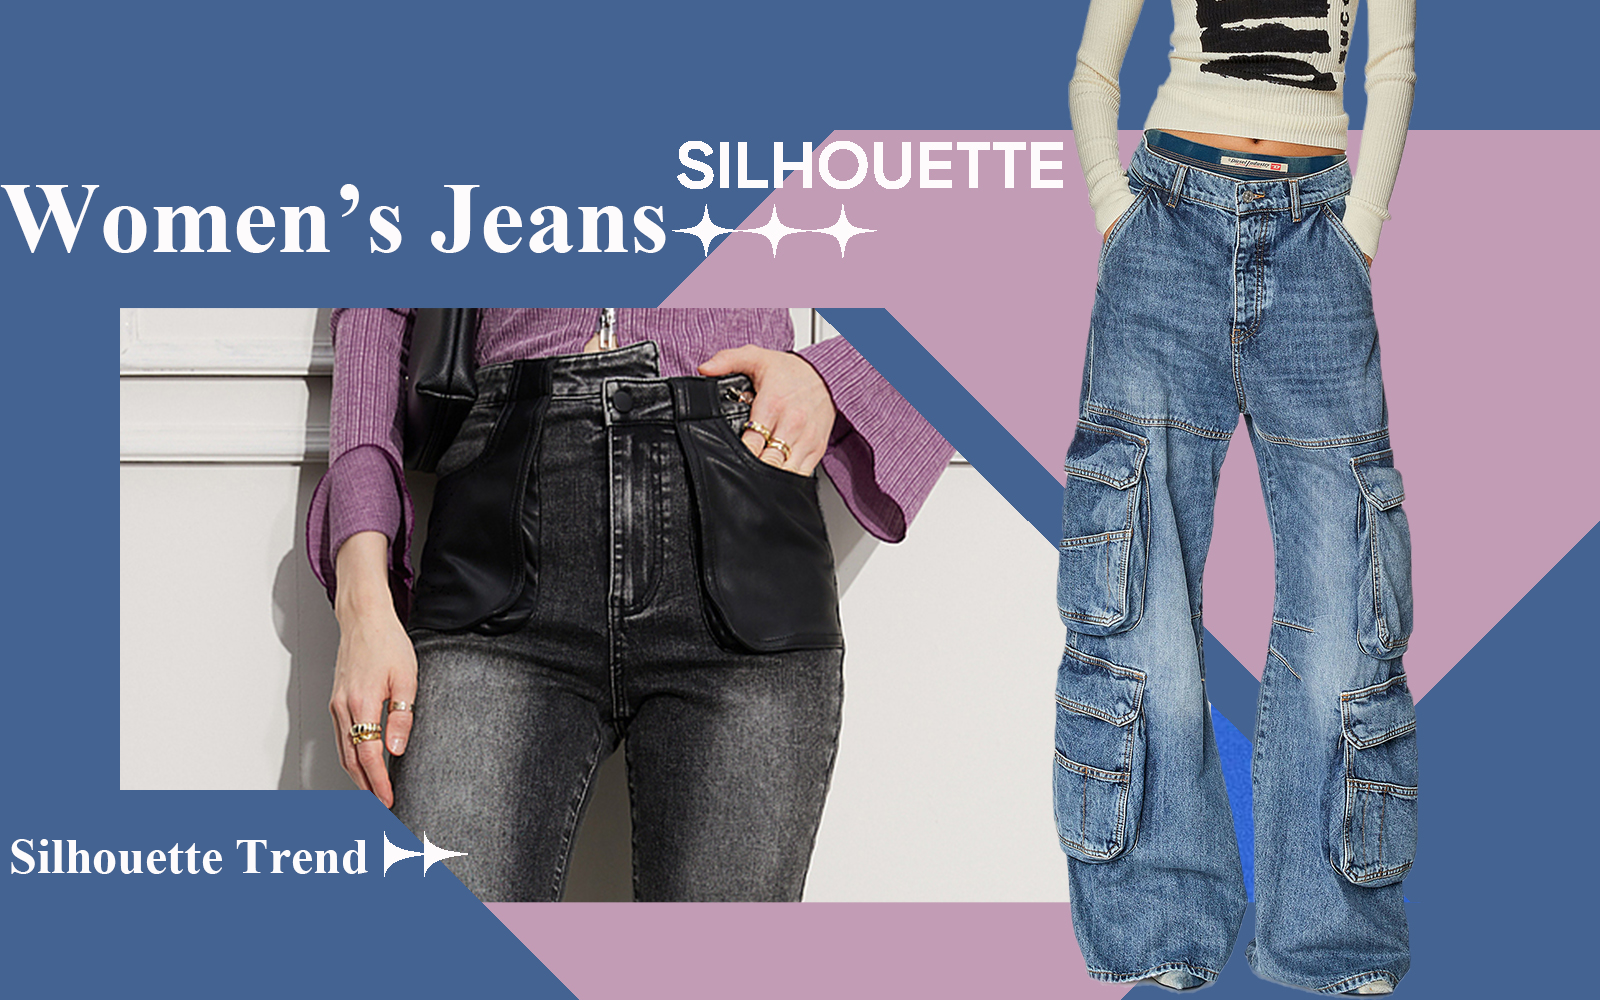 Body Shaping -- The Silhouette Trend for Women's Jeans